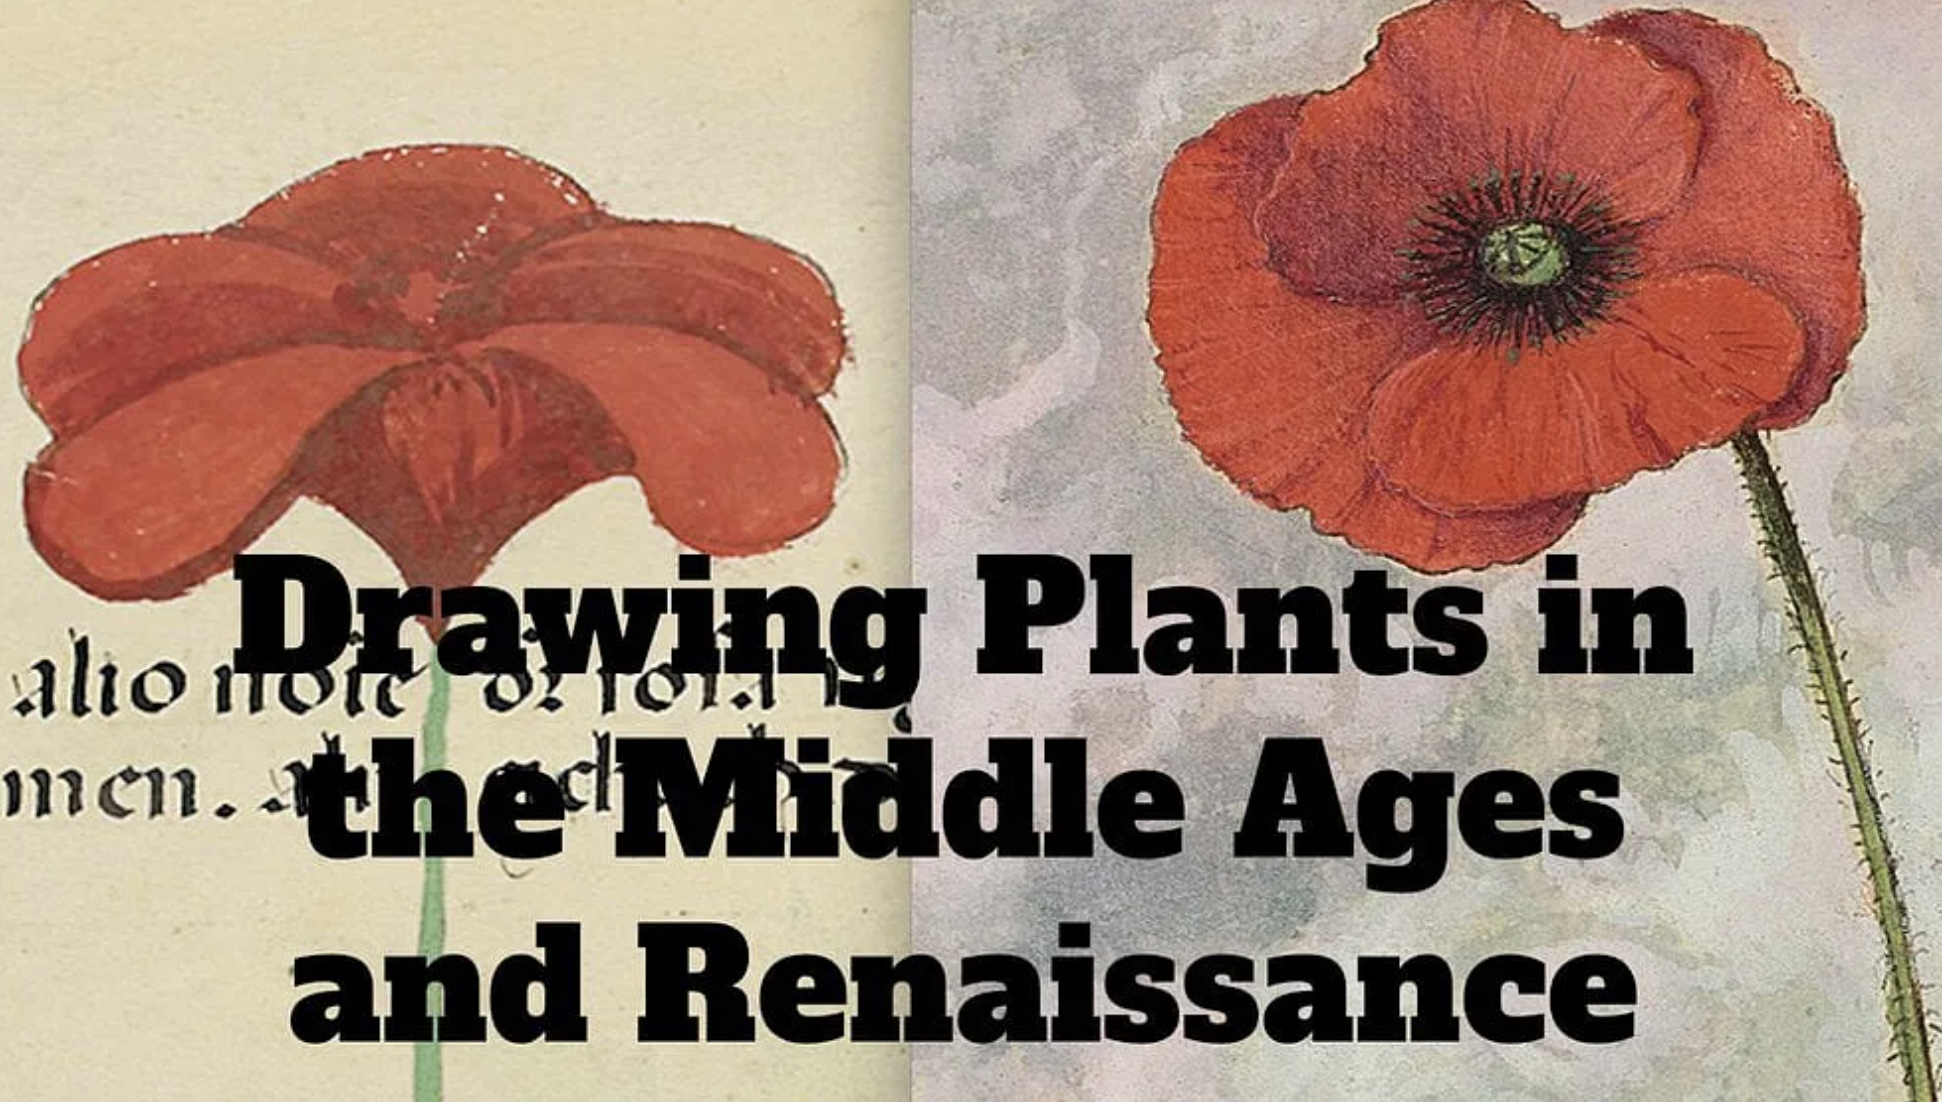 How-to-draw-plants-in-the-Middle-Ages-and-Renaissance LITE.pdf